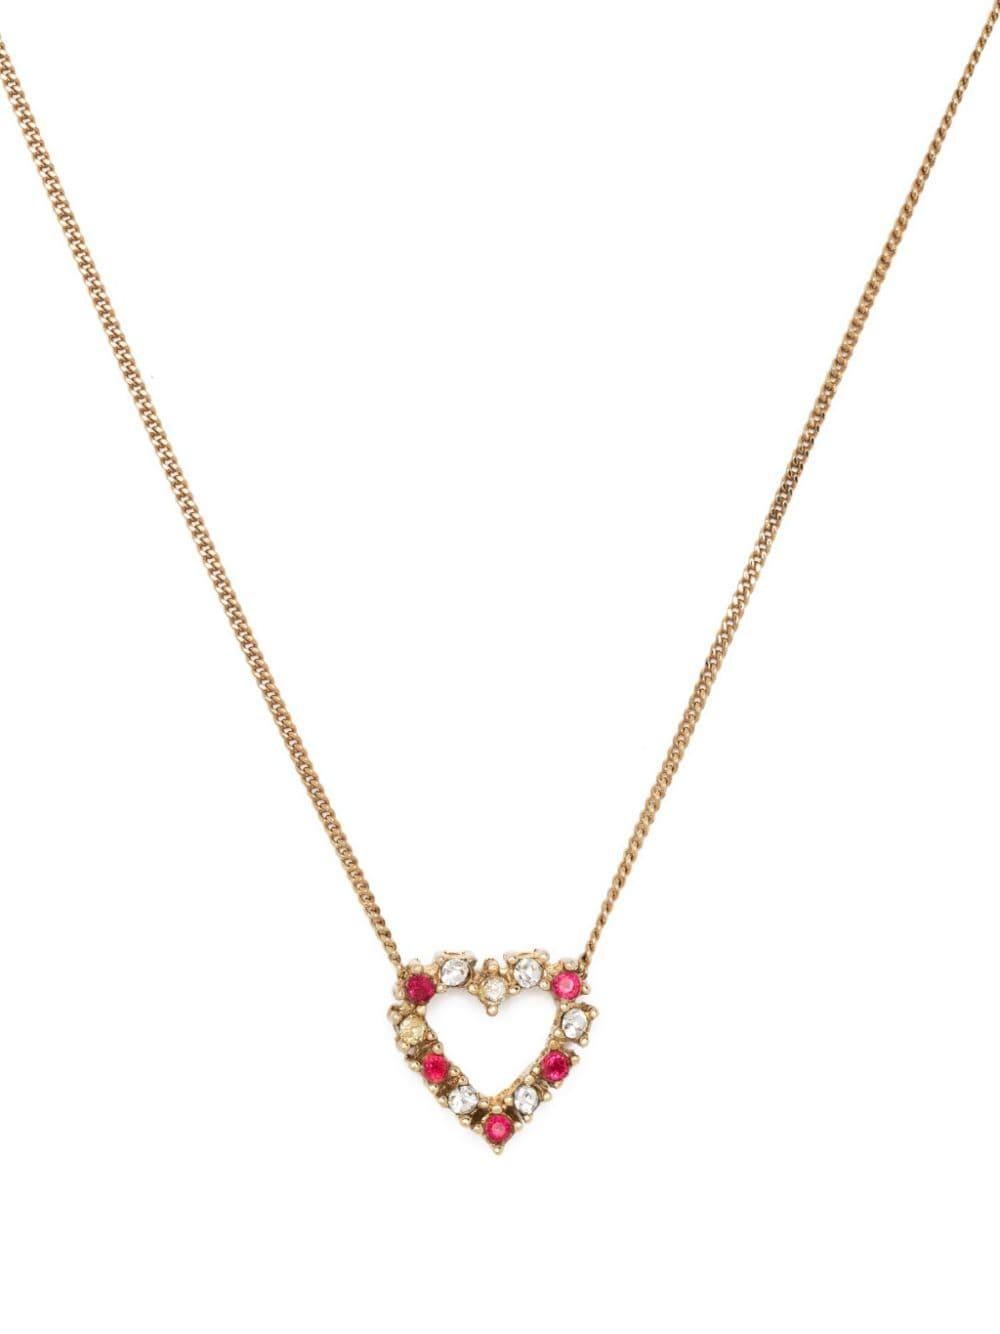 Dior rhinestone-embellished heart-charm necklace featuring heart charm, white and red rhinestone embellishment, small logo charm, thin chain, adjustable fit, spring-ring fastening.
Length: 16.9in (43cm)
Pendant Length: 0.5in (1.3cm)
Circa: 1990s
In